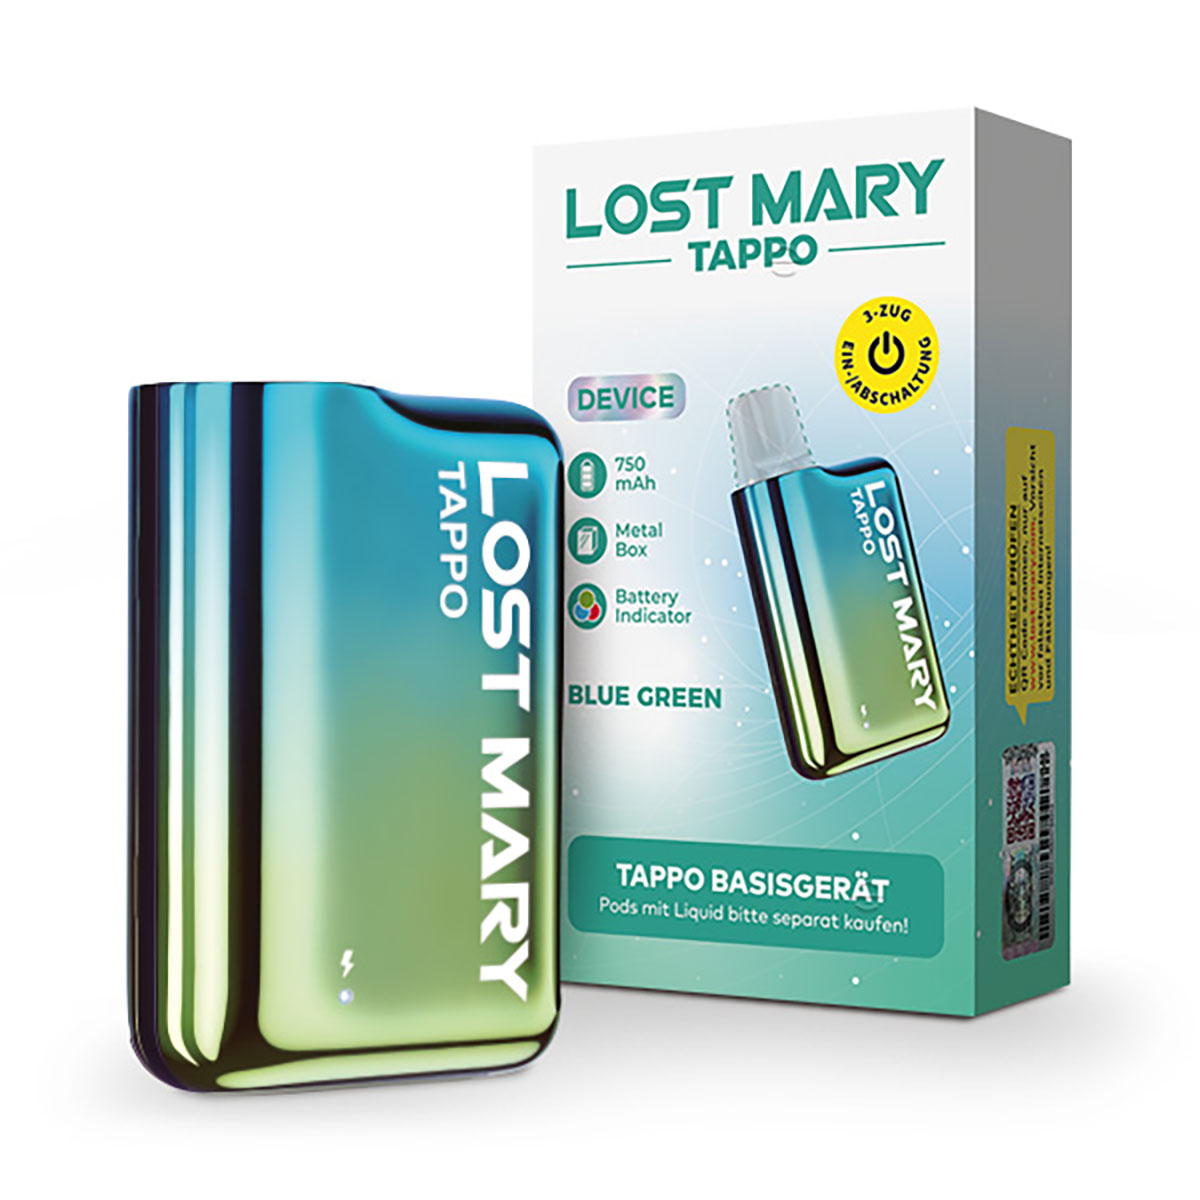 Lost Mary Tappo Blue Green Device